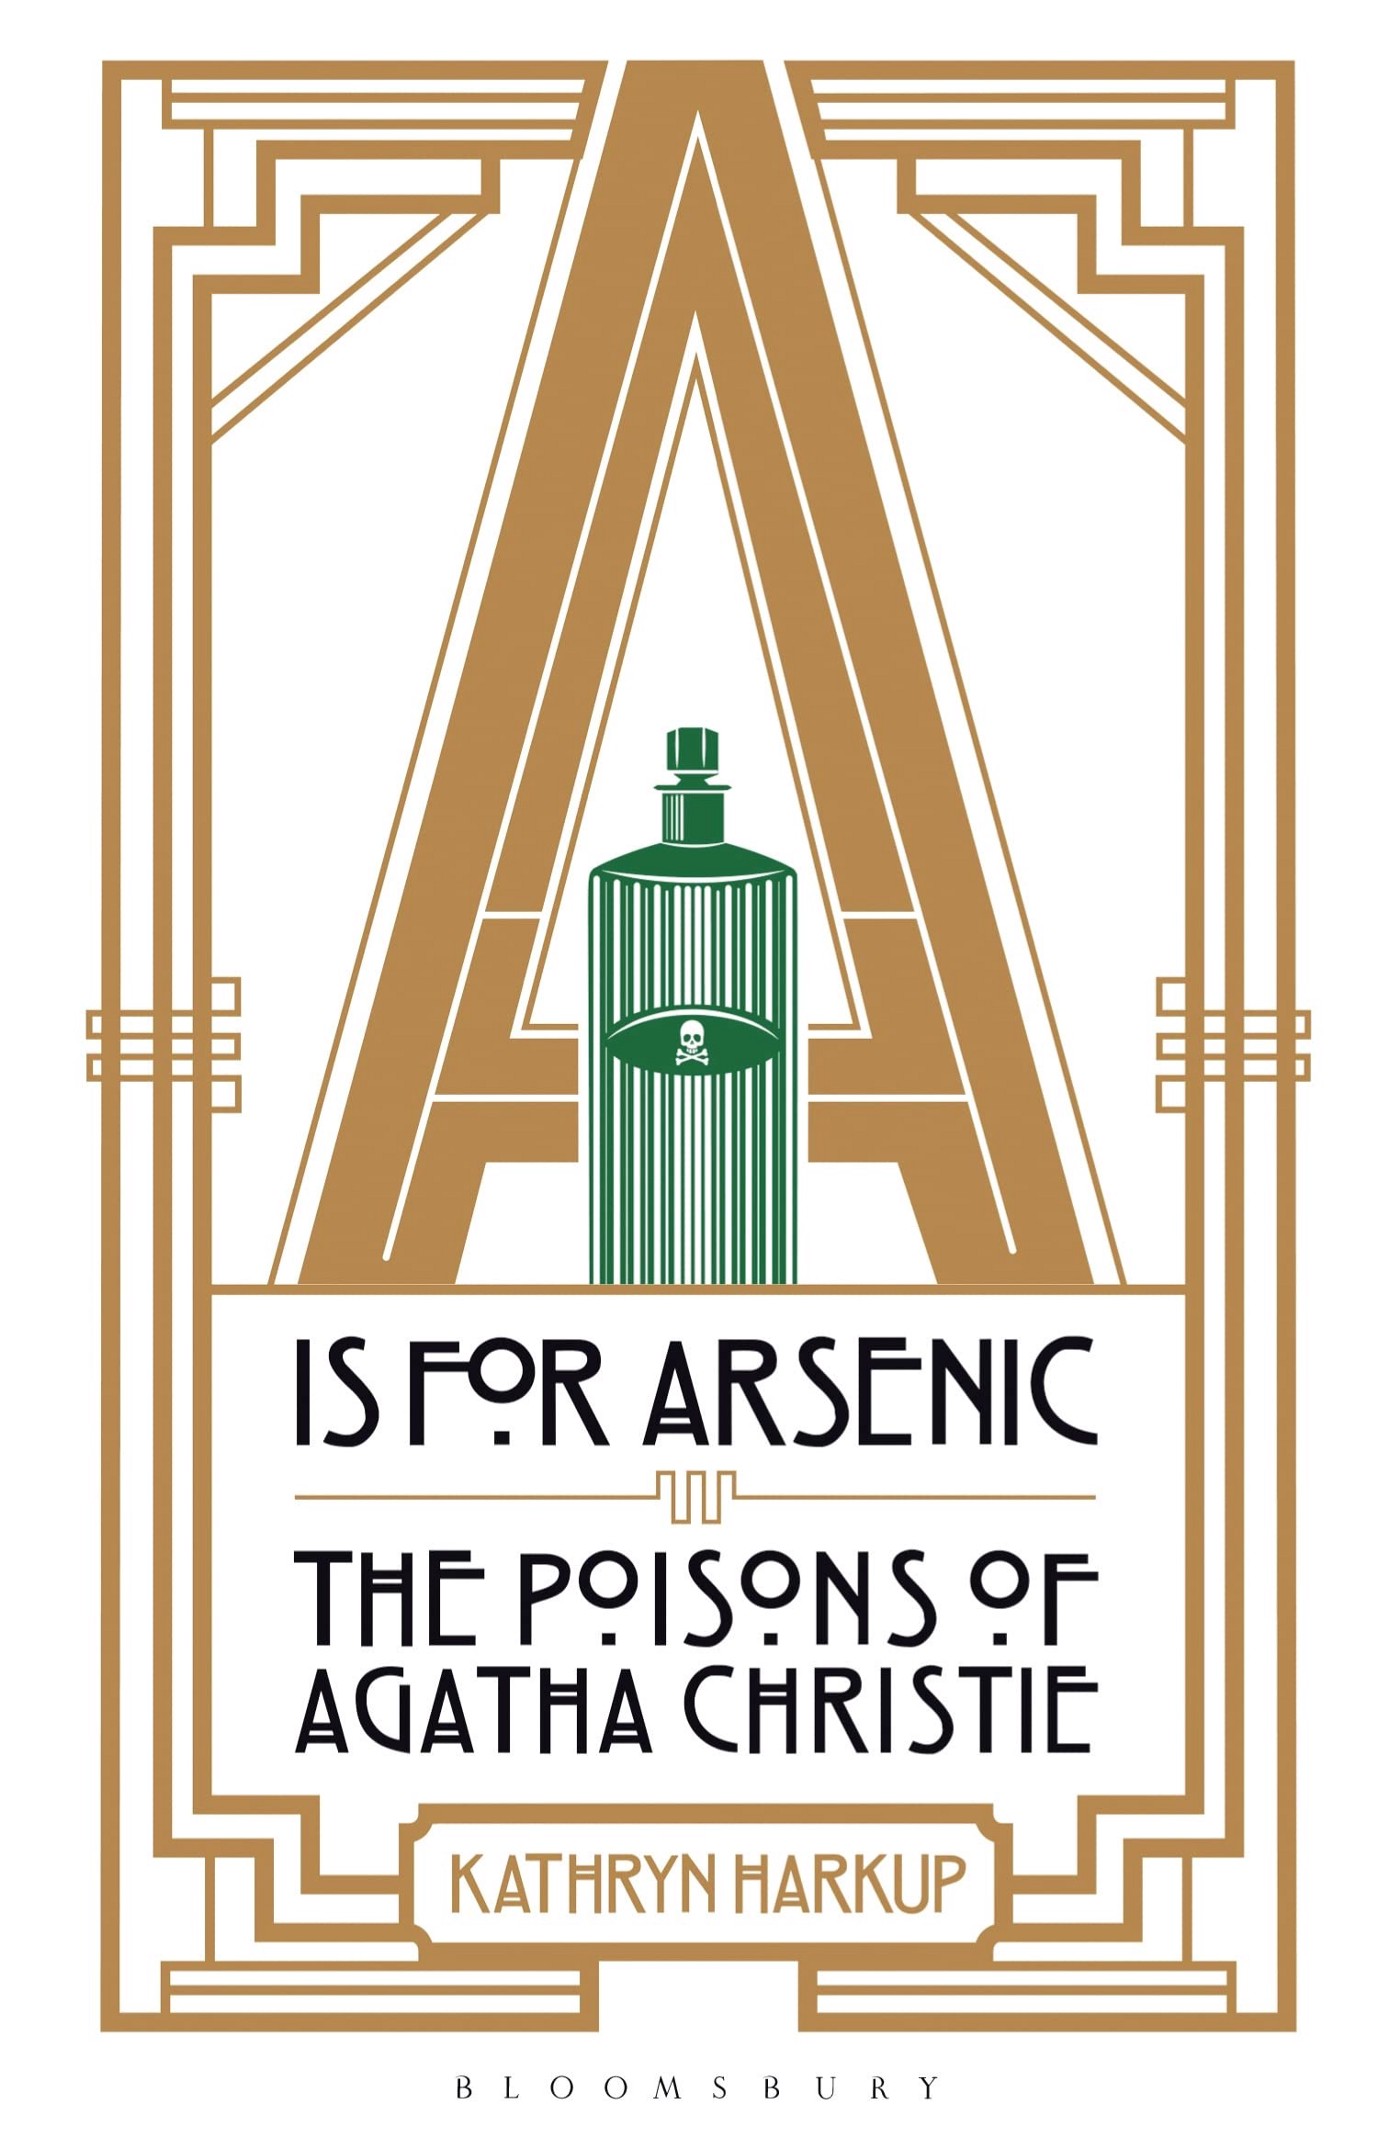 Book cover of A is for Arsenic showing a large golden A and a bottle within that.